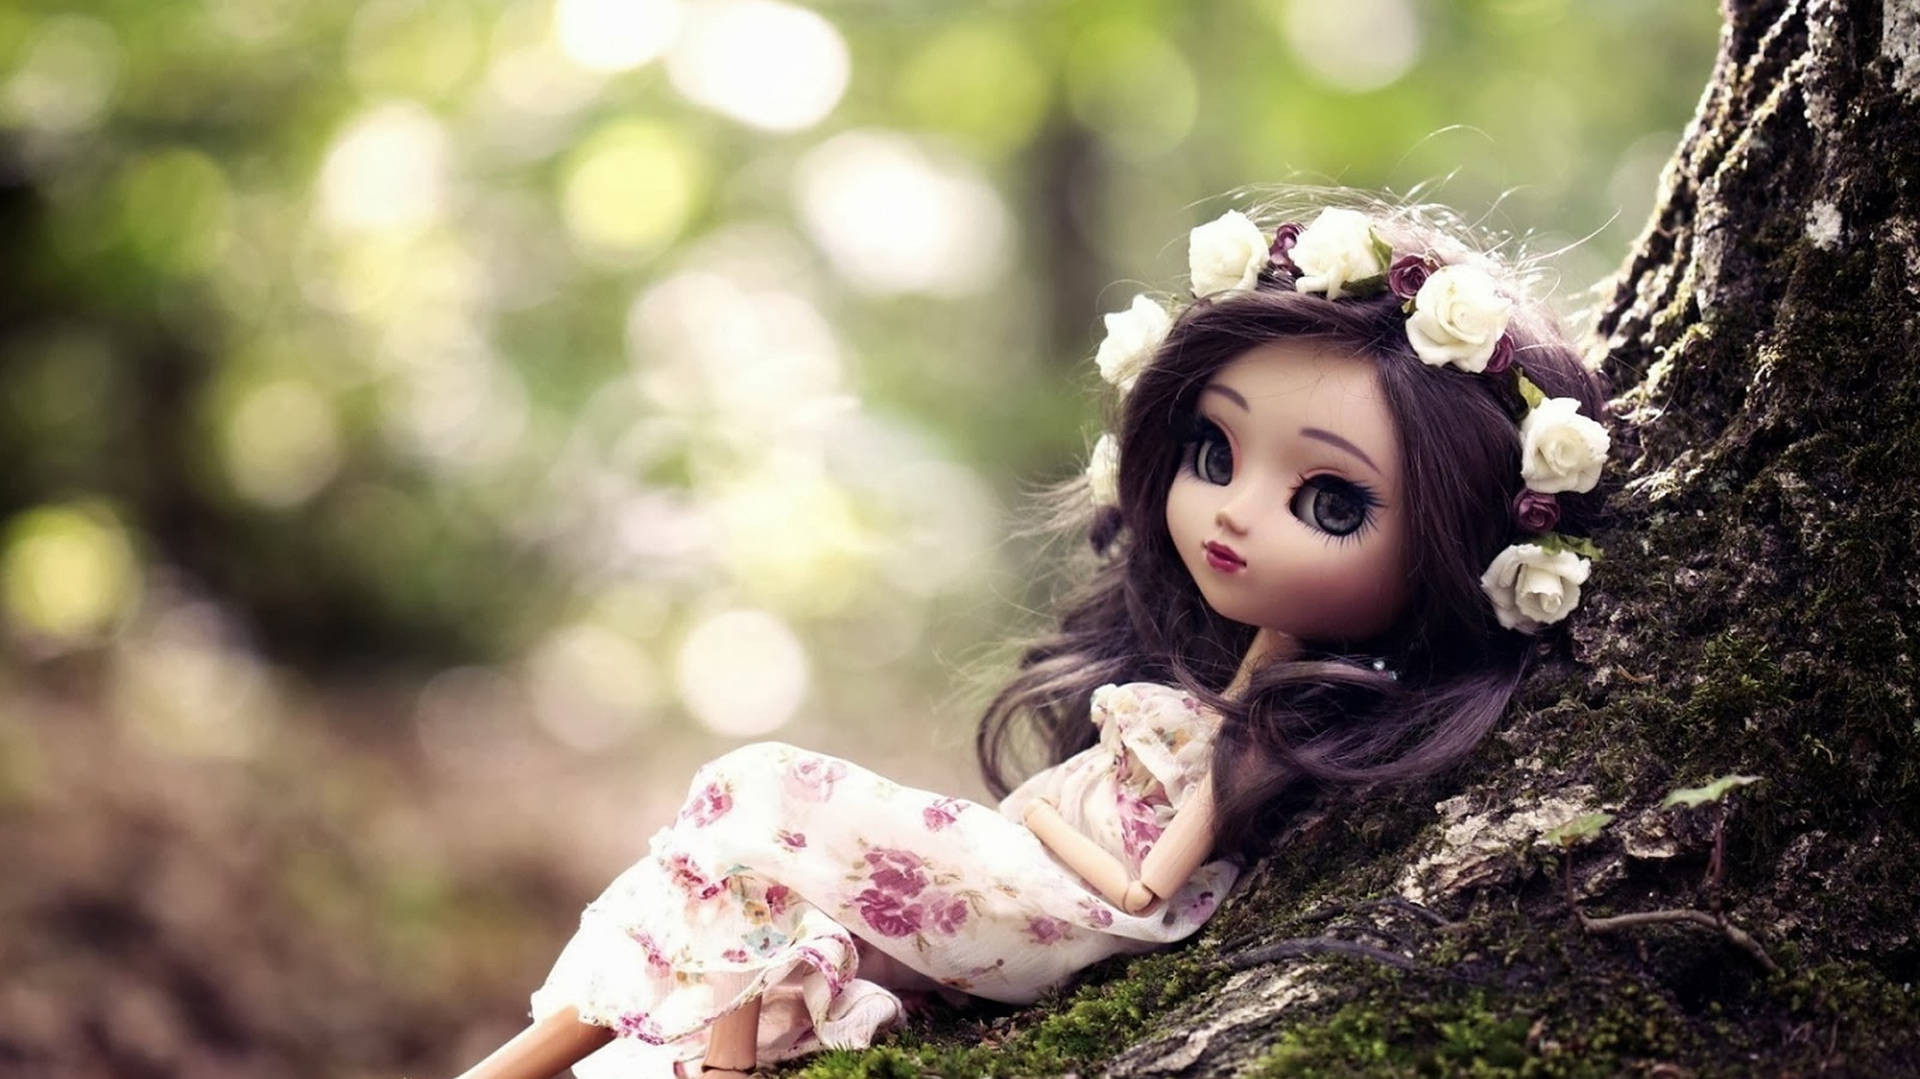 Free Doll Wallpaper Downloads, [79+] Doll Wallpapers for FREE |  Wallpapers.com